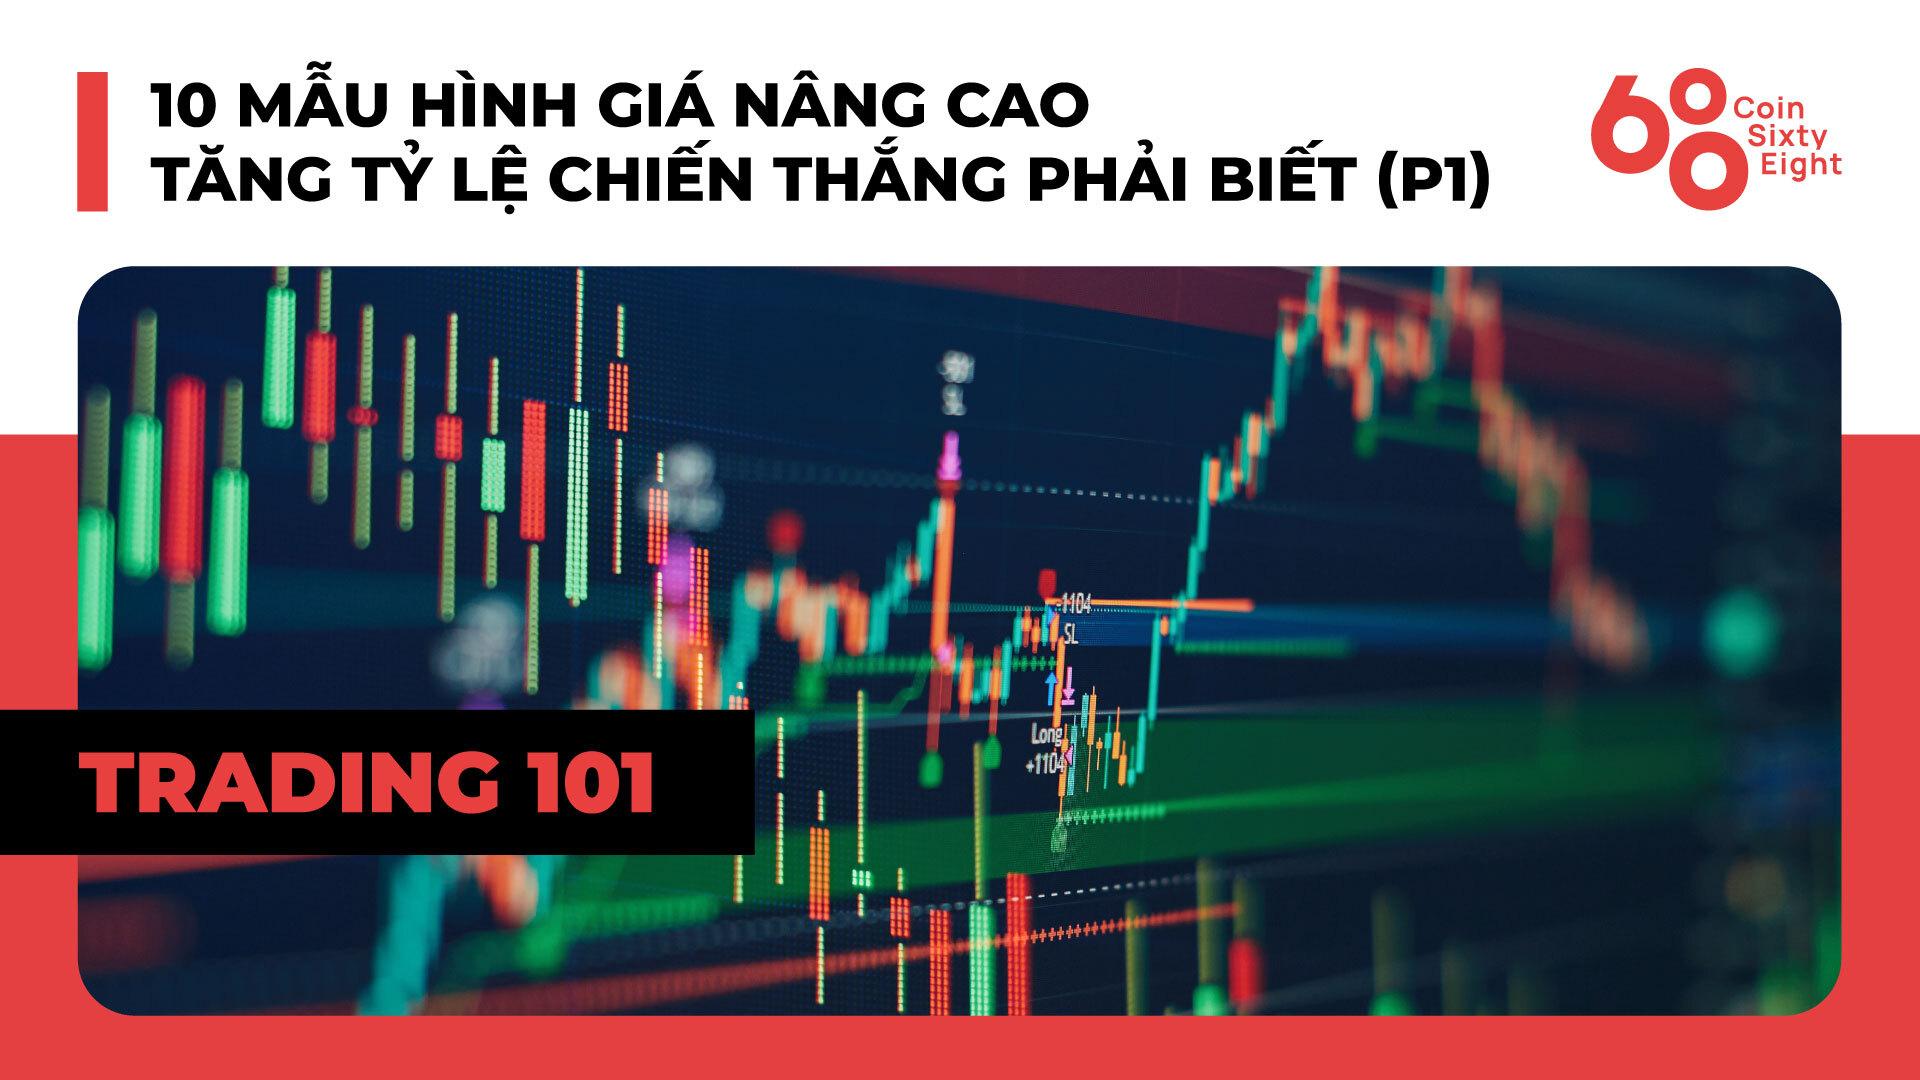 lop-giao-dich-101-price-action-trading-phan-18-10-mau-hinh-gia-nang-cao-tang-ty-le-chien-thang-phai-biet-p1